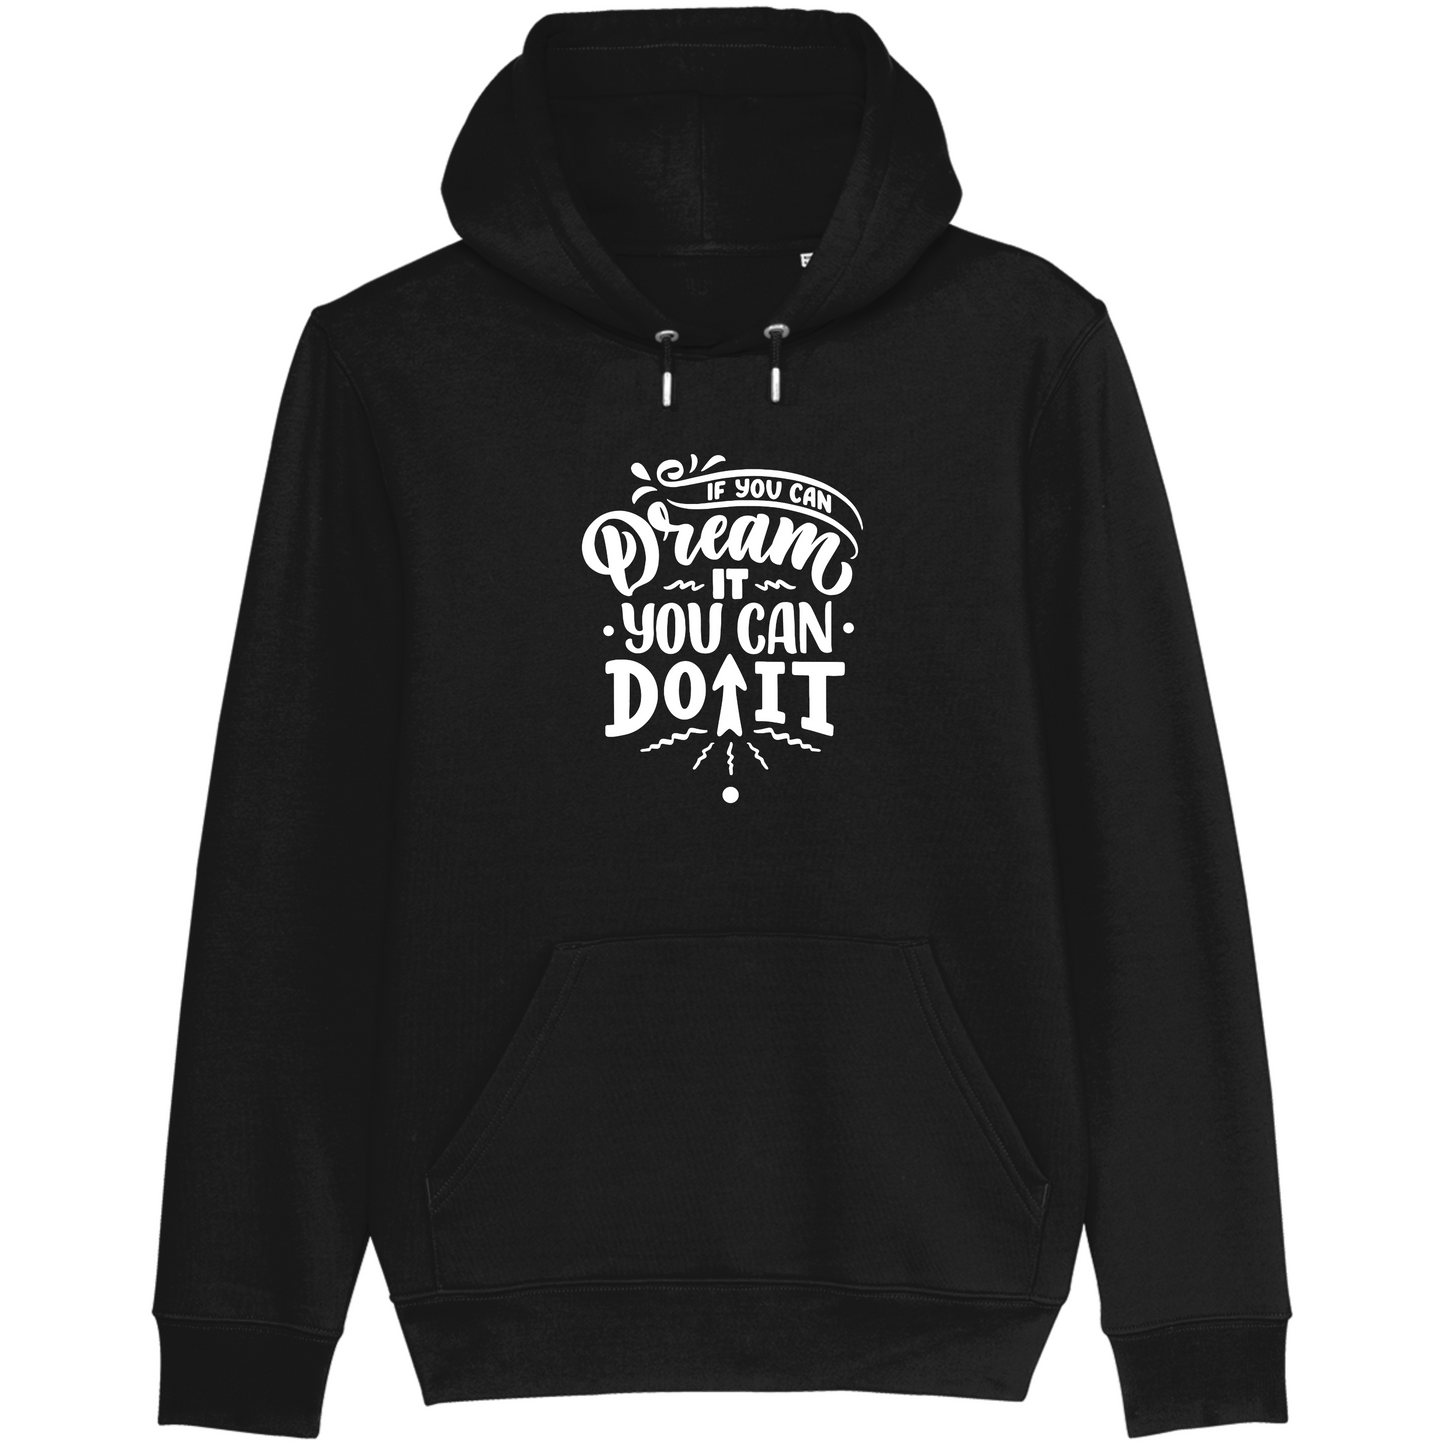 If You Can Dream It You Can Do It - Hoodie